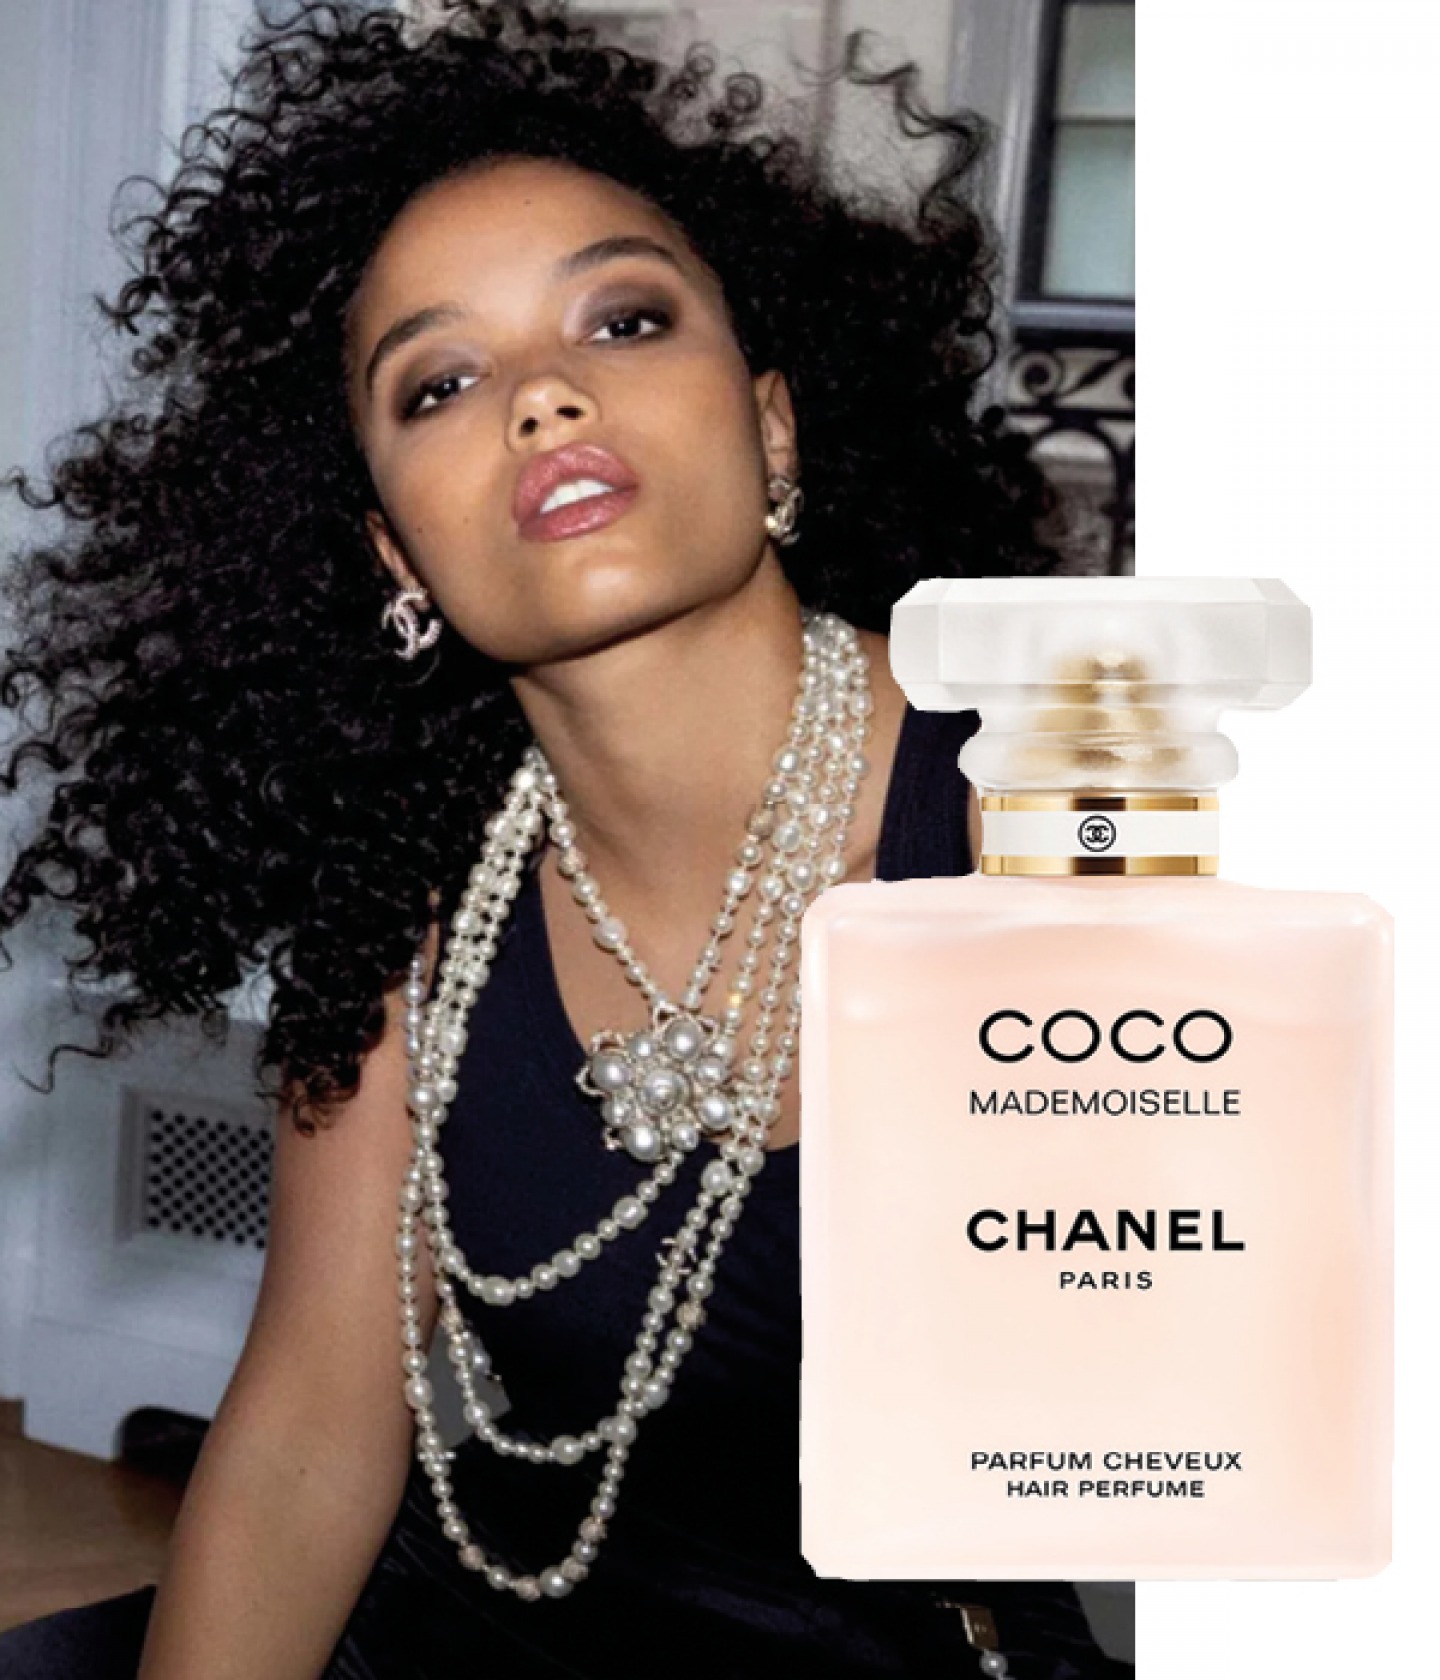 Whitney Peak Is The First Black Spokesmodel for Coco Mademoiselle